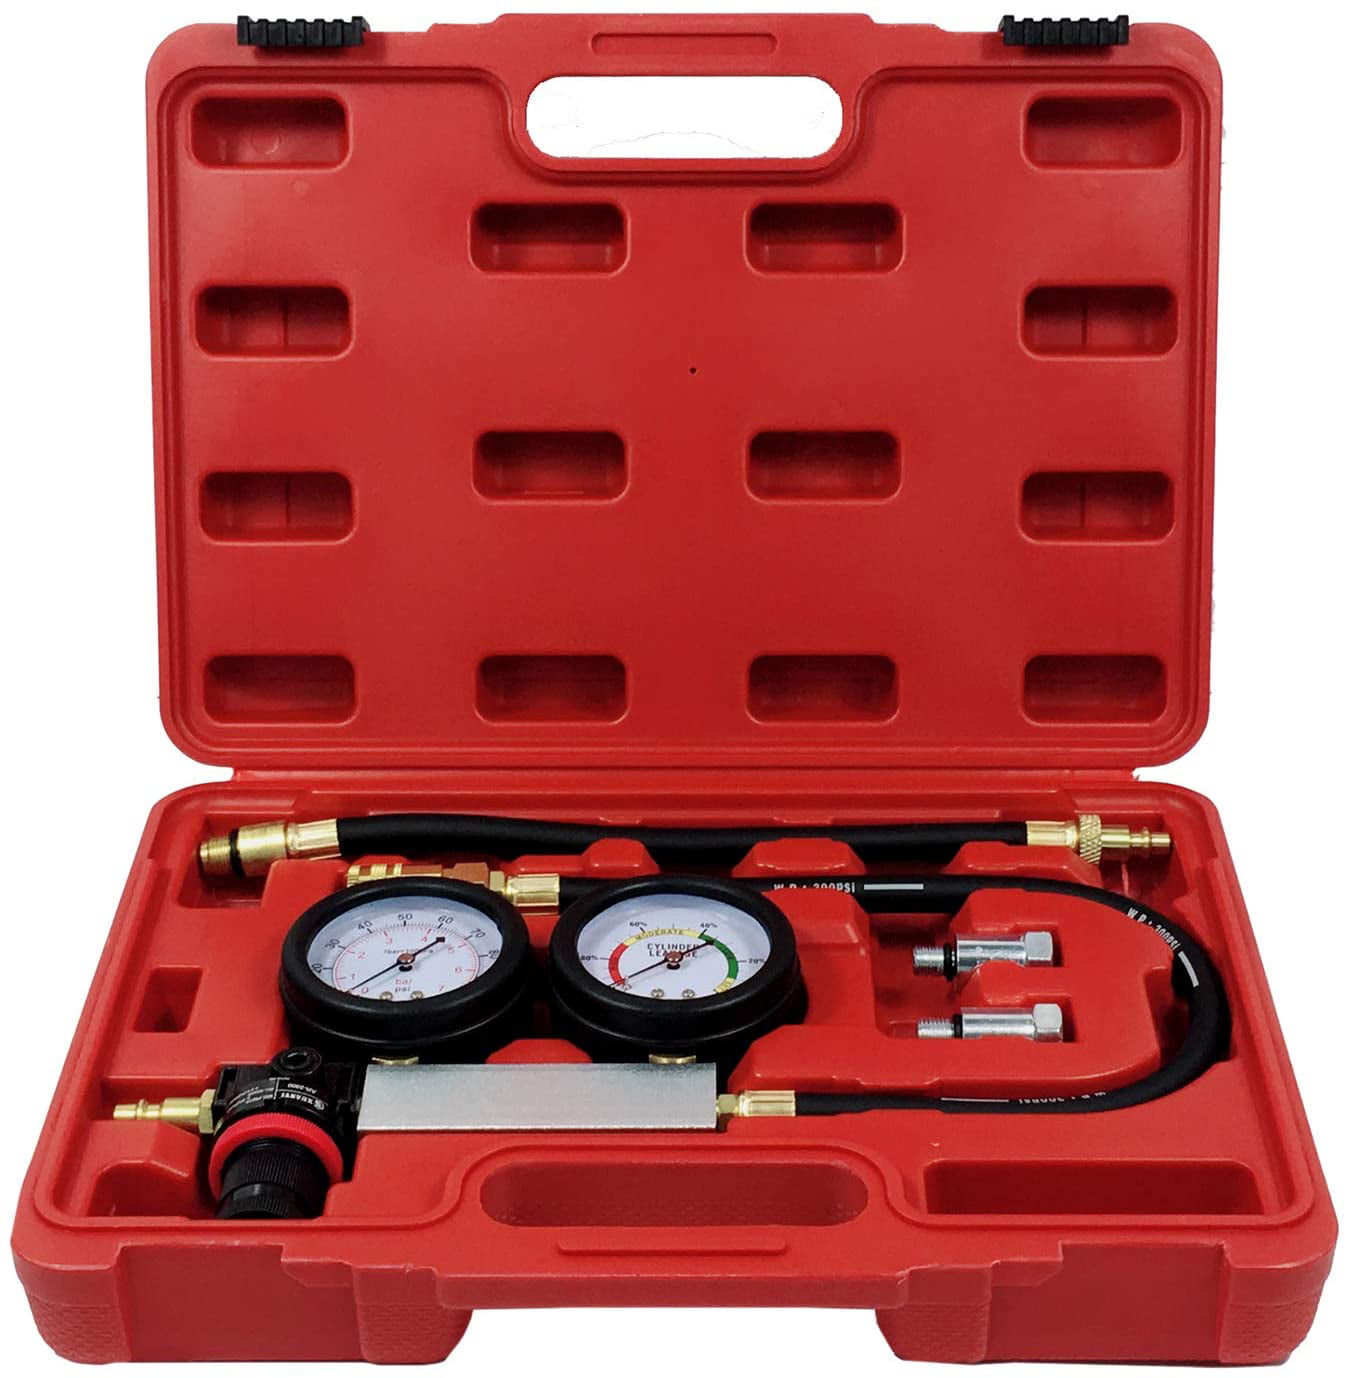 ThreeH TU-21 Cylinder Leak Detector Engine Compression Tester Gauge Kit for Petrol Engine with 12 and 14mm Spark Plugs MA05 